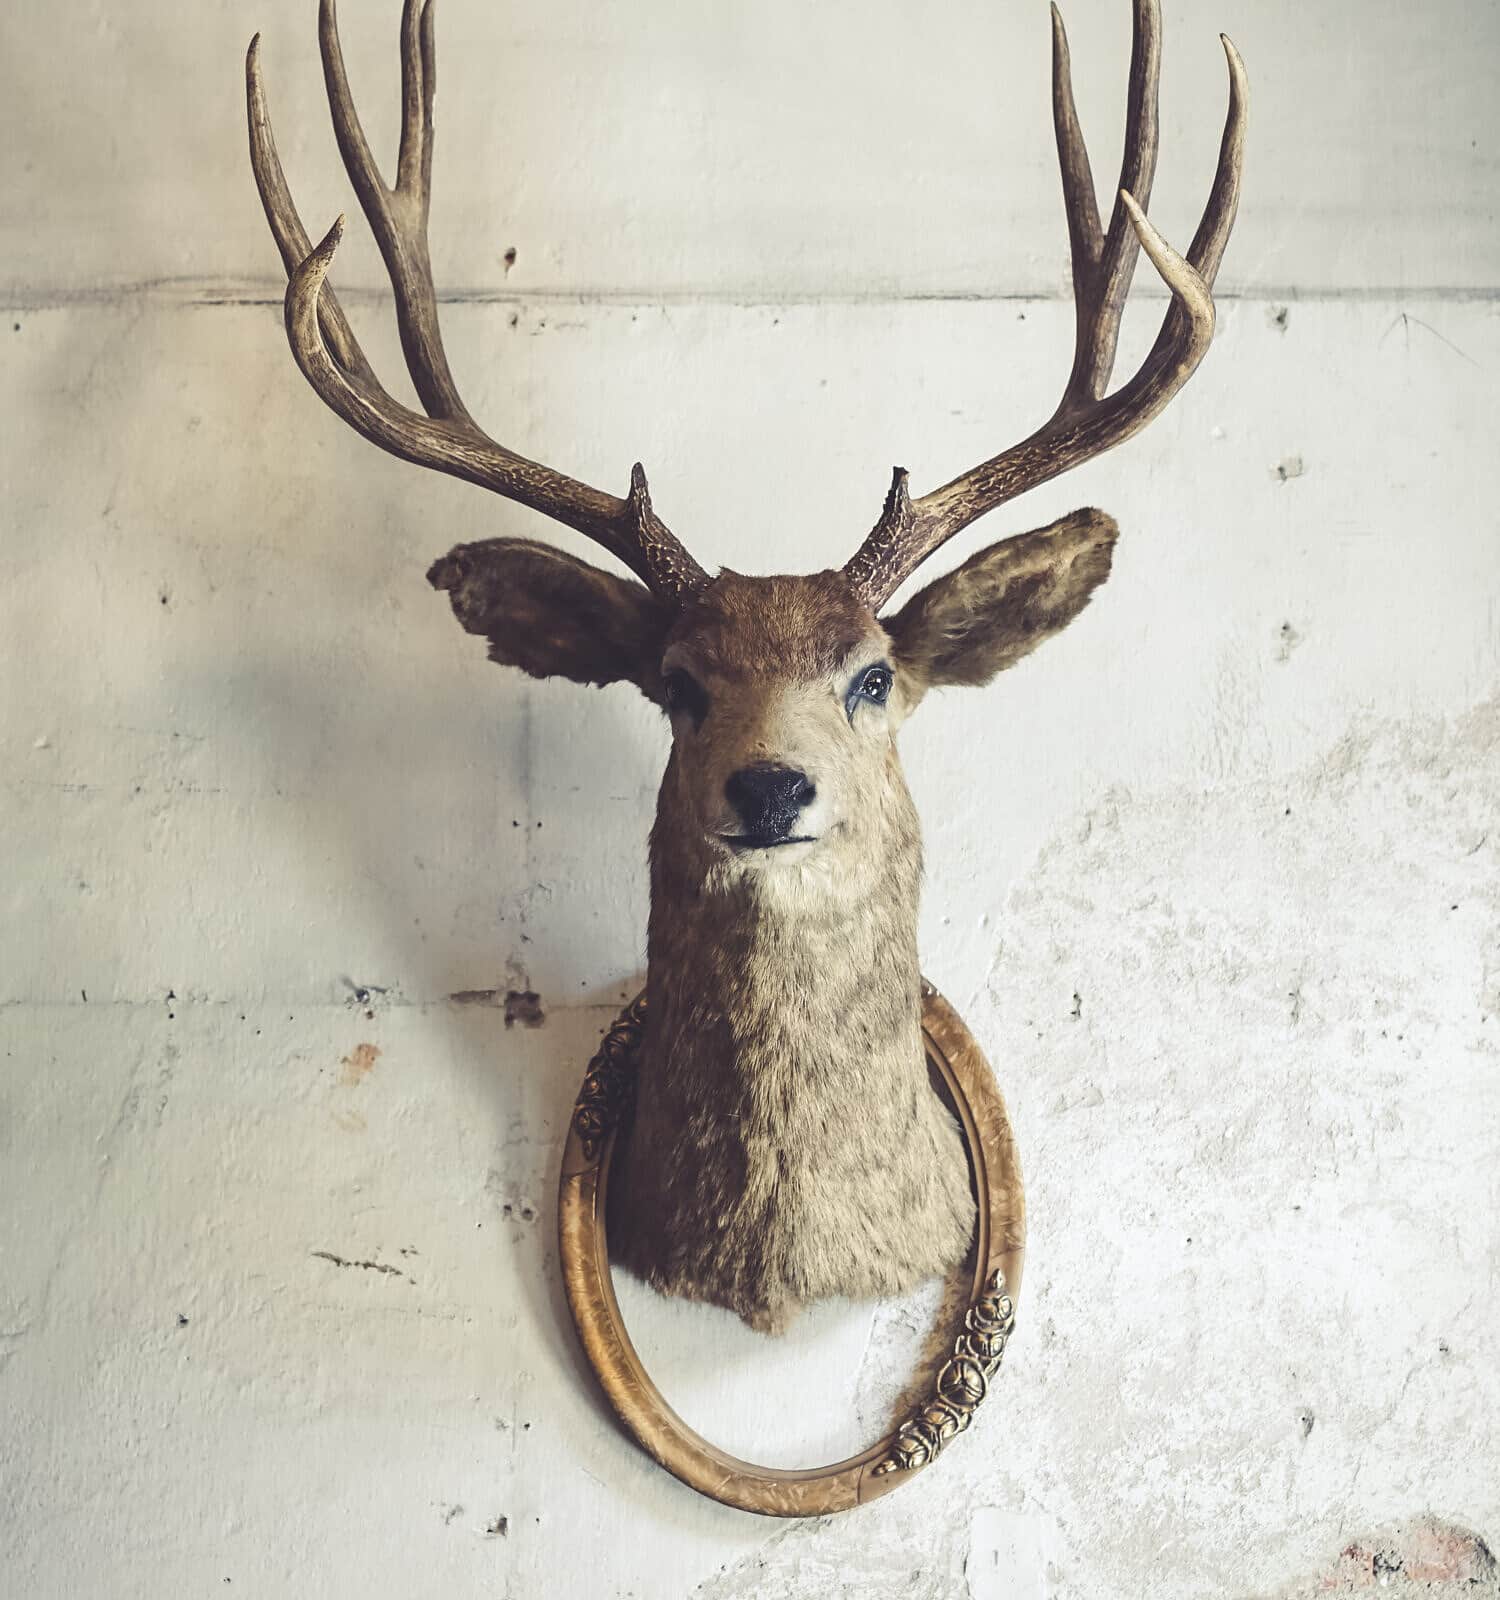 Deer head on the wall. Taxidermy animal of a deer head and vintage frame on the old rotten brick wall. Vintage style.